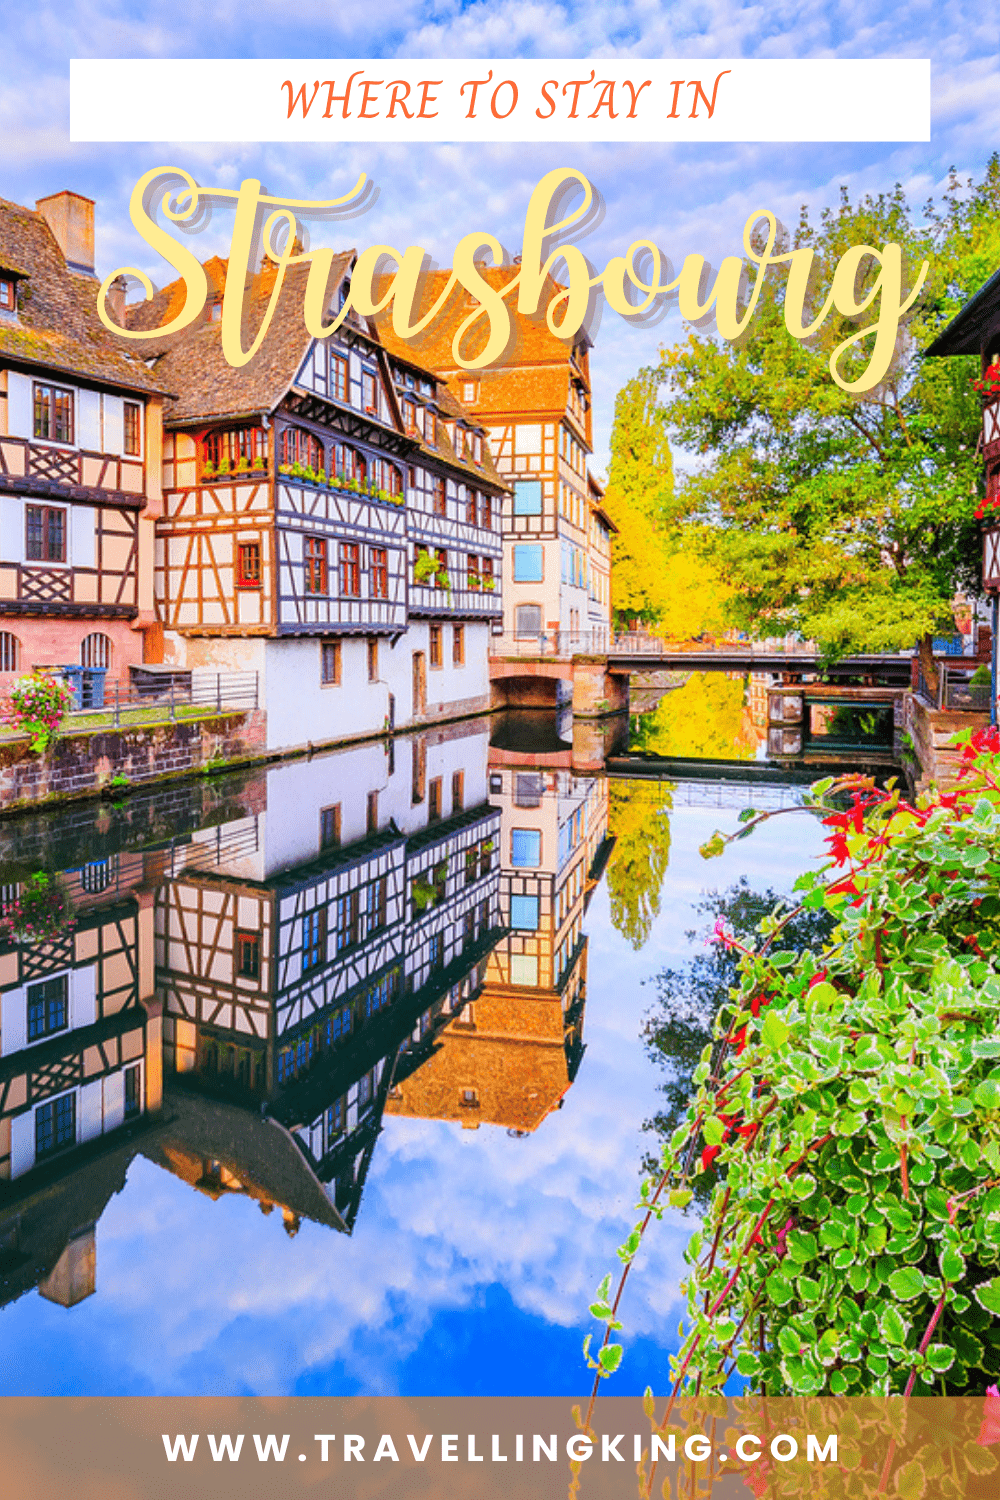 Where To Stay in Strasbourg